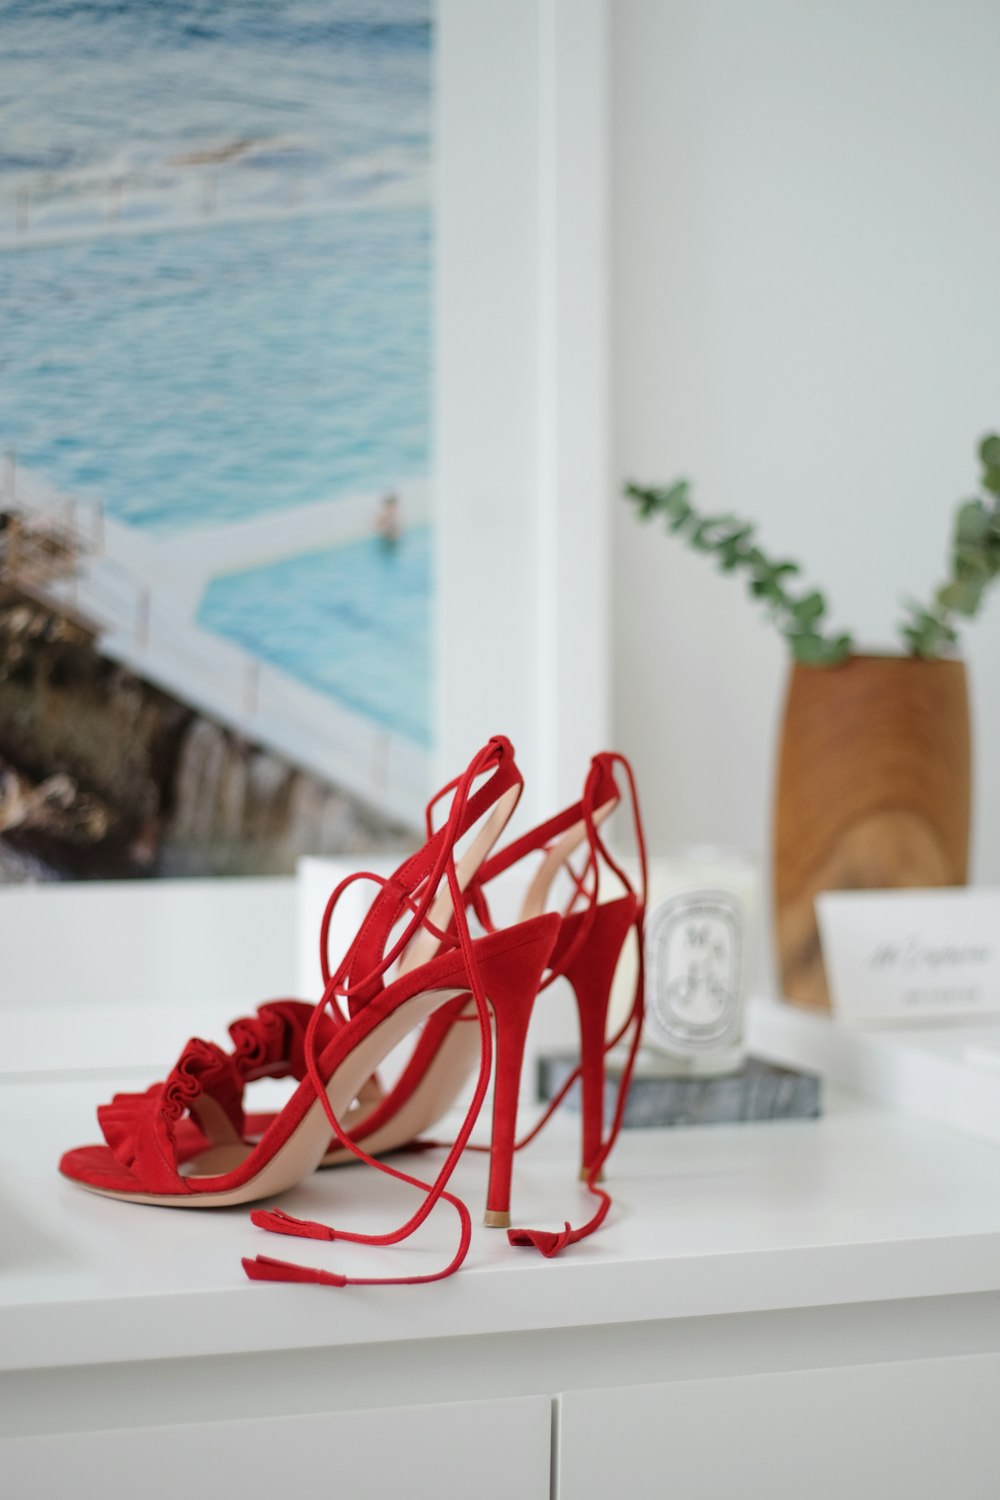 Red High Heels Pictures | Download Free Images on Unsplash